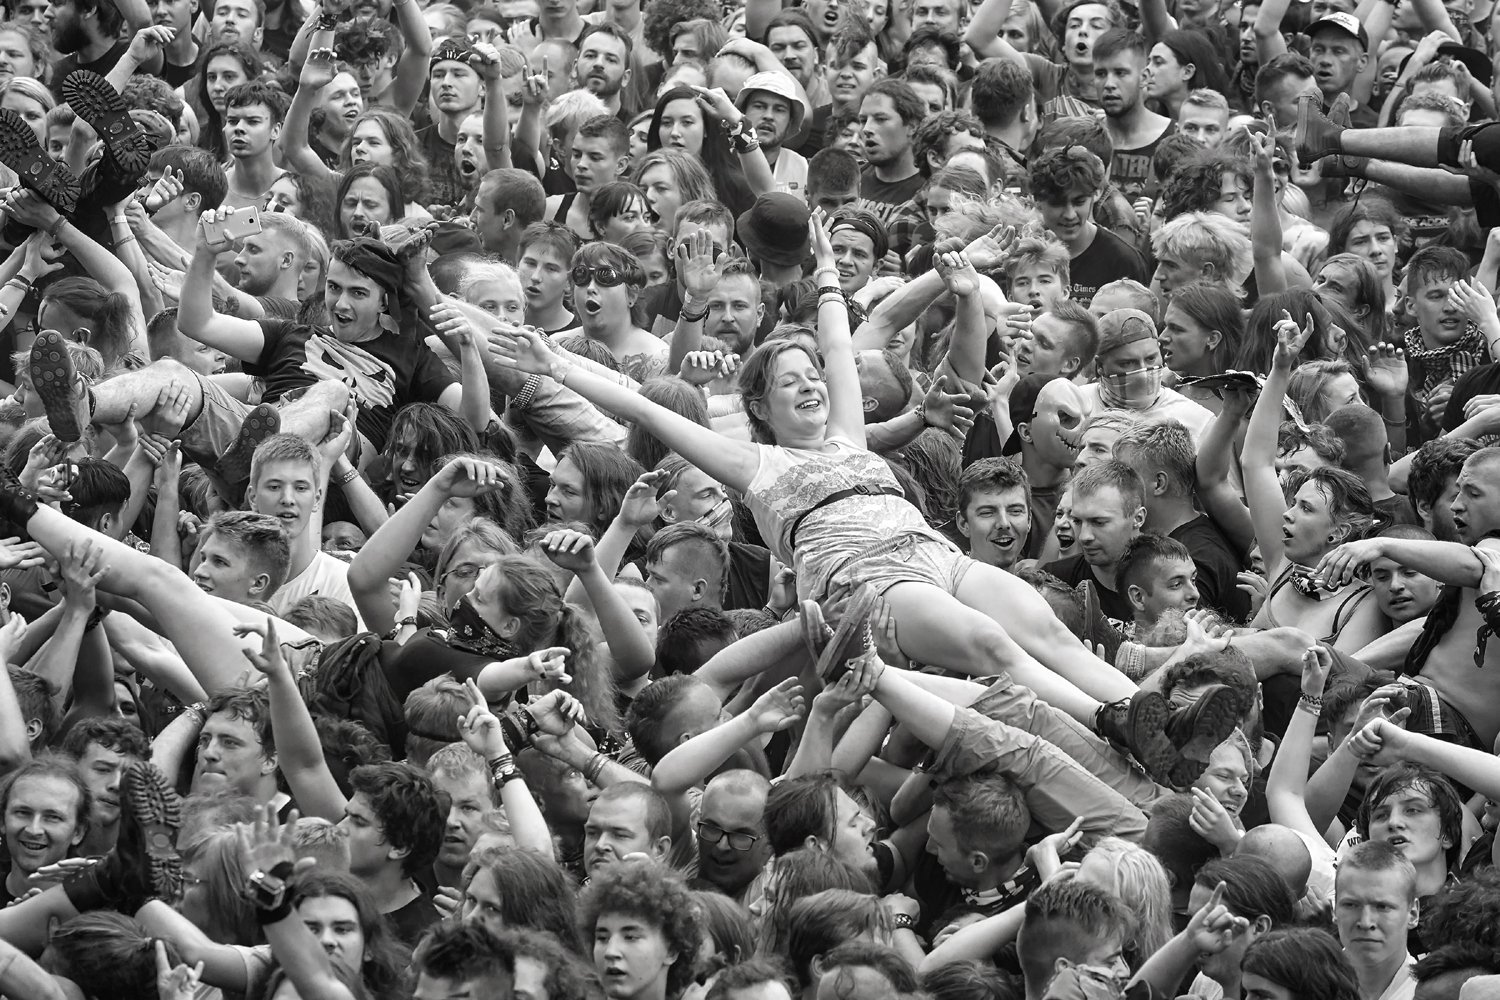 Woodstock was a one-off reflection of its times